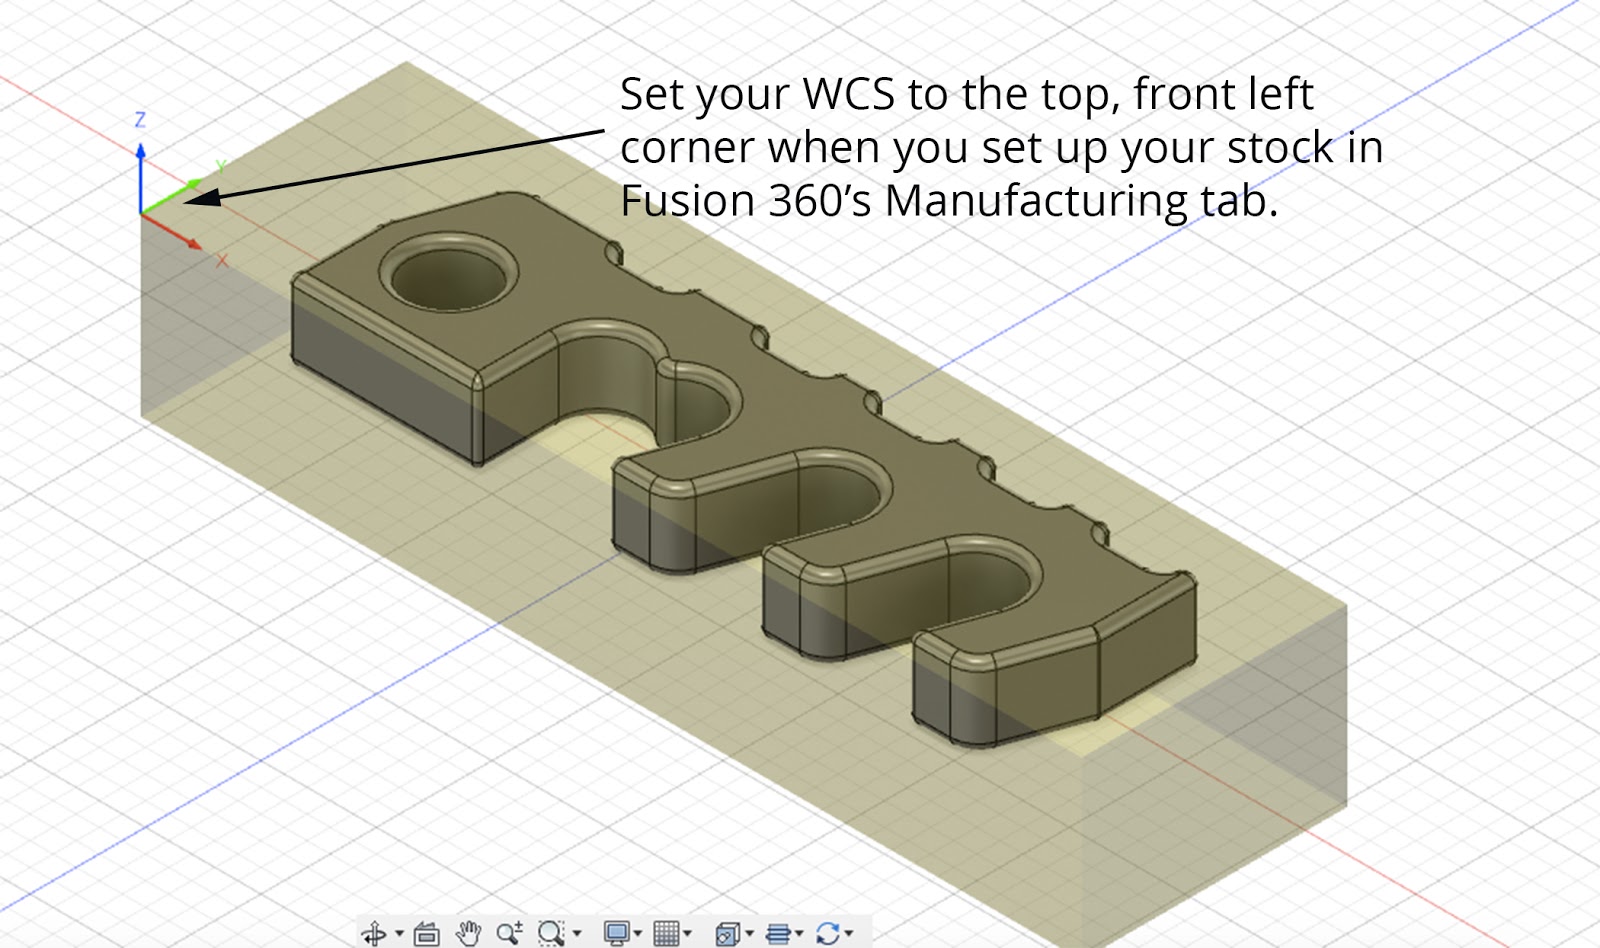 Setting-Up-WCS-System-in-Fusion-360.jpg